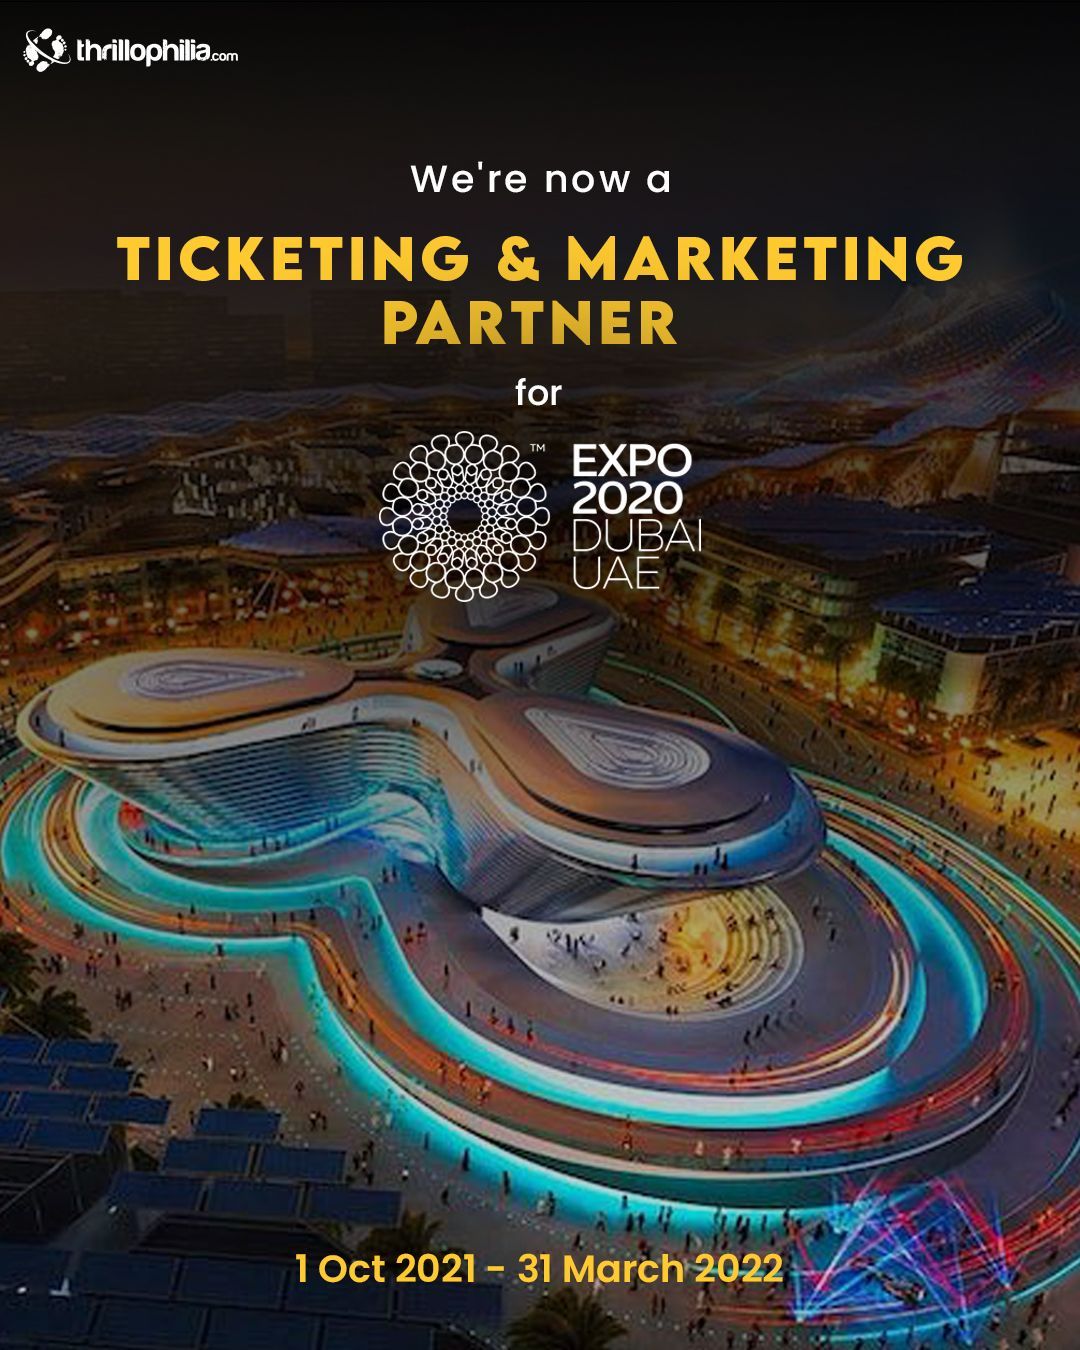 Thrillophilia is officially a booking partner for the Dubai Expo 2020!